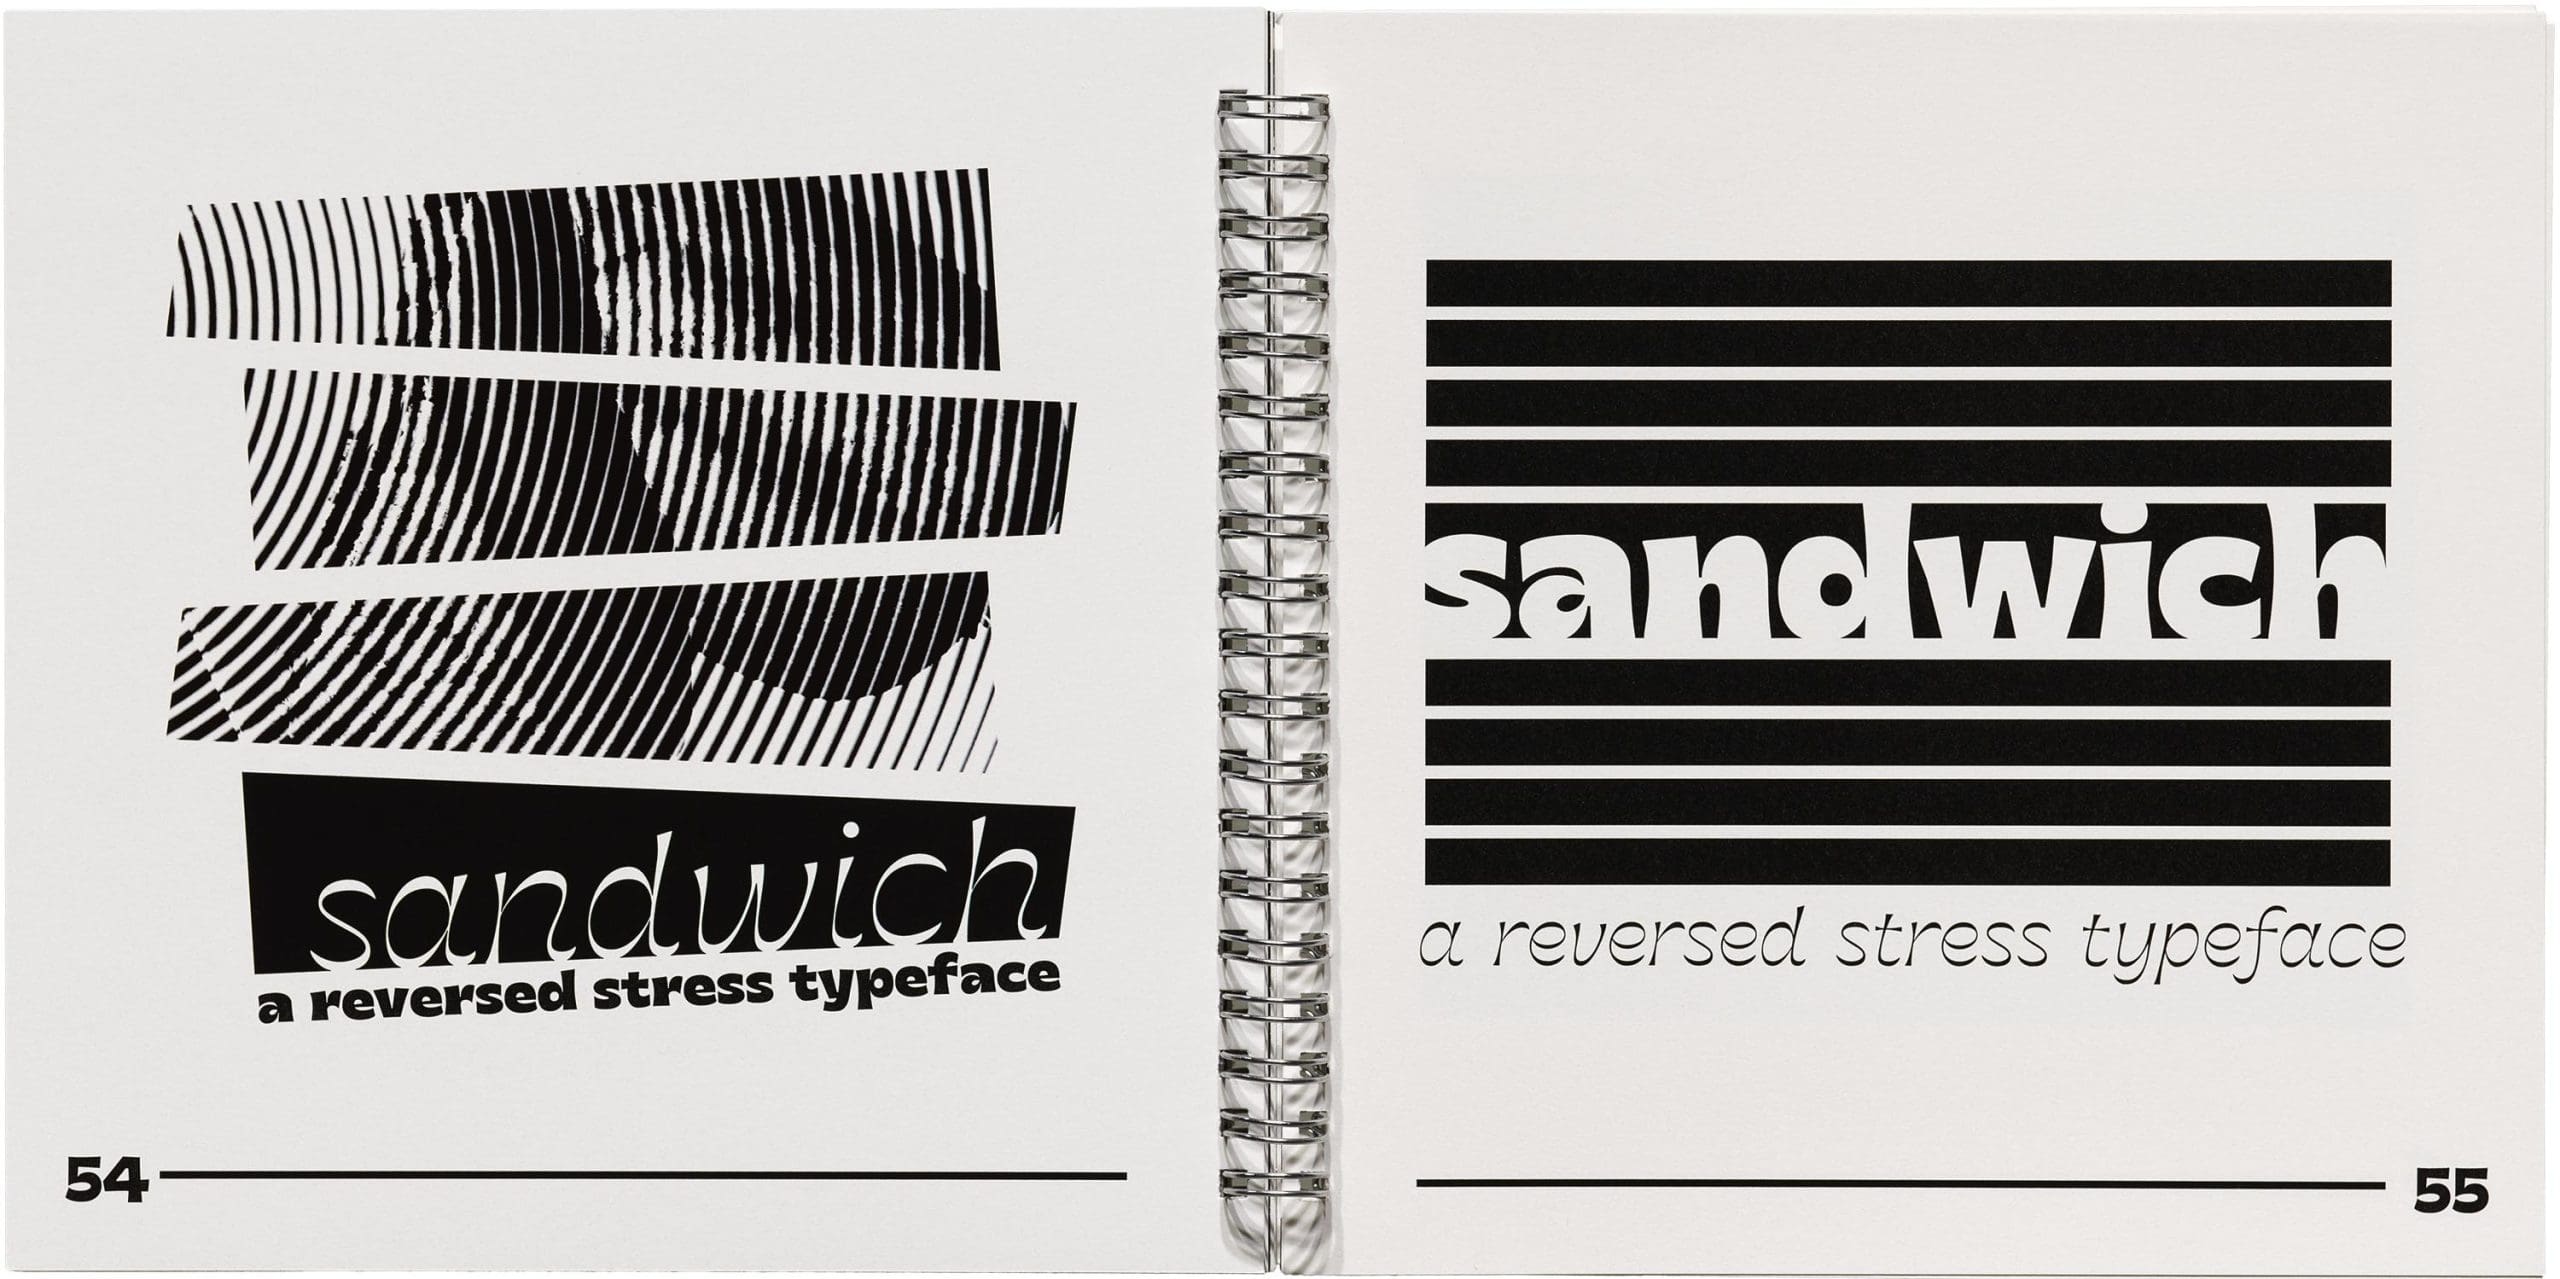 Book spread featuring trapezoid shapes on the left, with "Sandwich" and "A reversed stress typeface" written. On the right side, the same is written within a rectangle of stripes. Both feature different weights of the typeface.